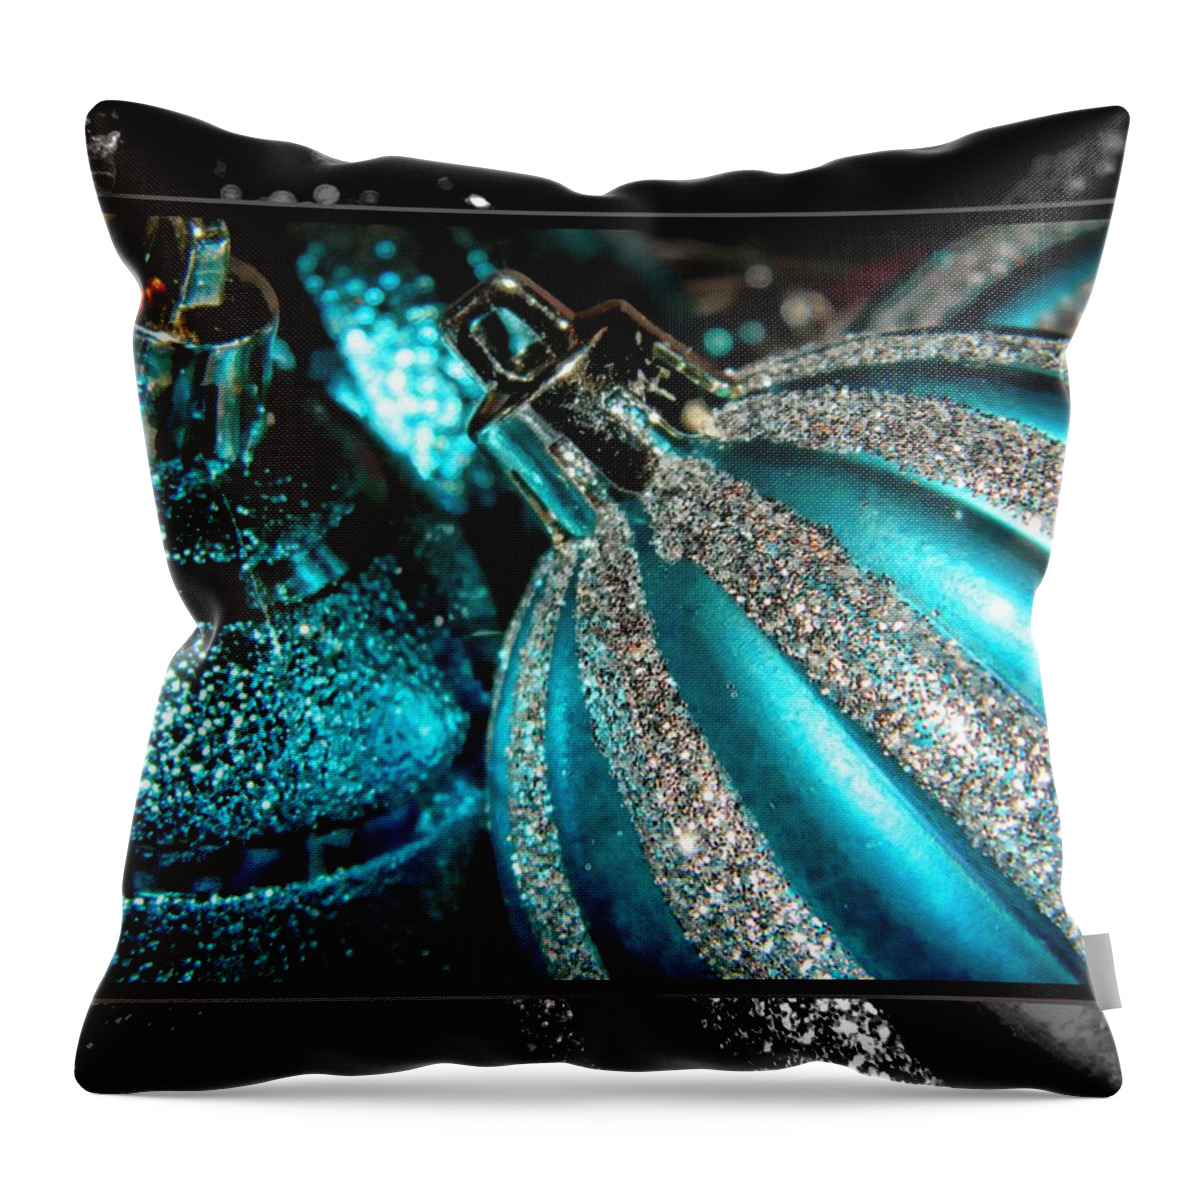 Christmas Throw Pillow featuring the photograph Aqua Baulbs by Michelle Frizzell-Thompson